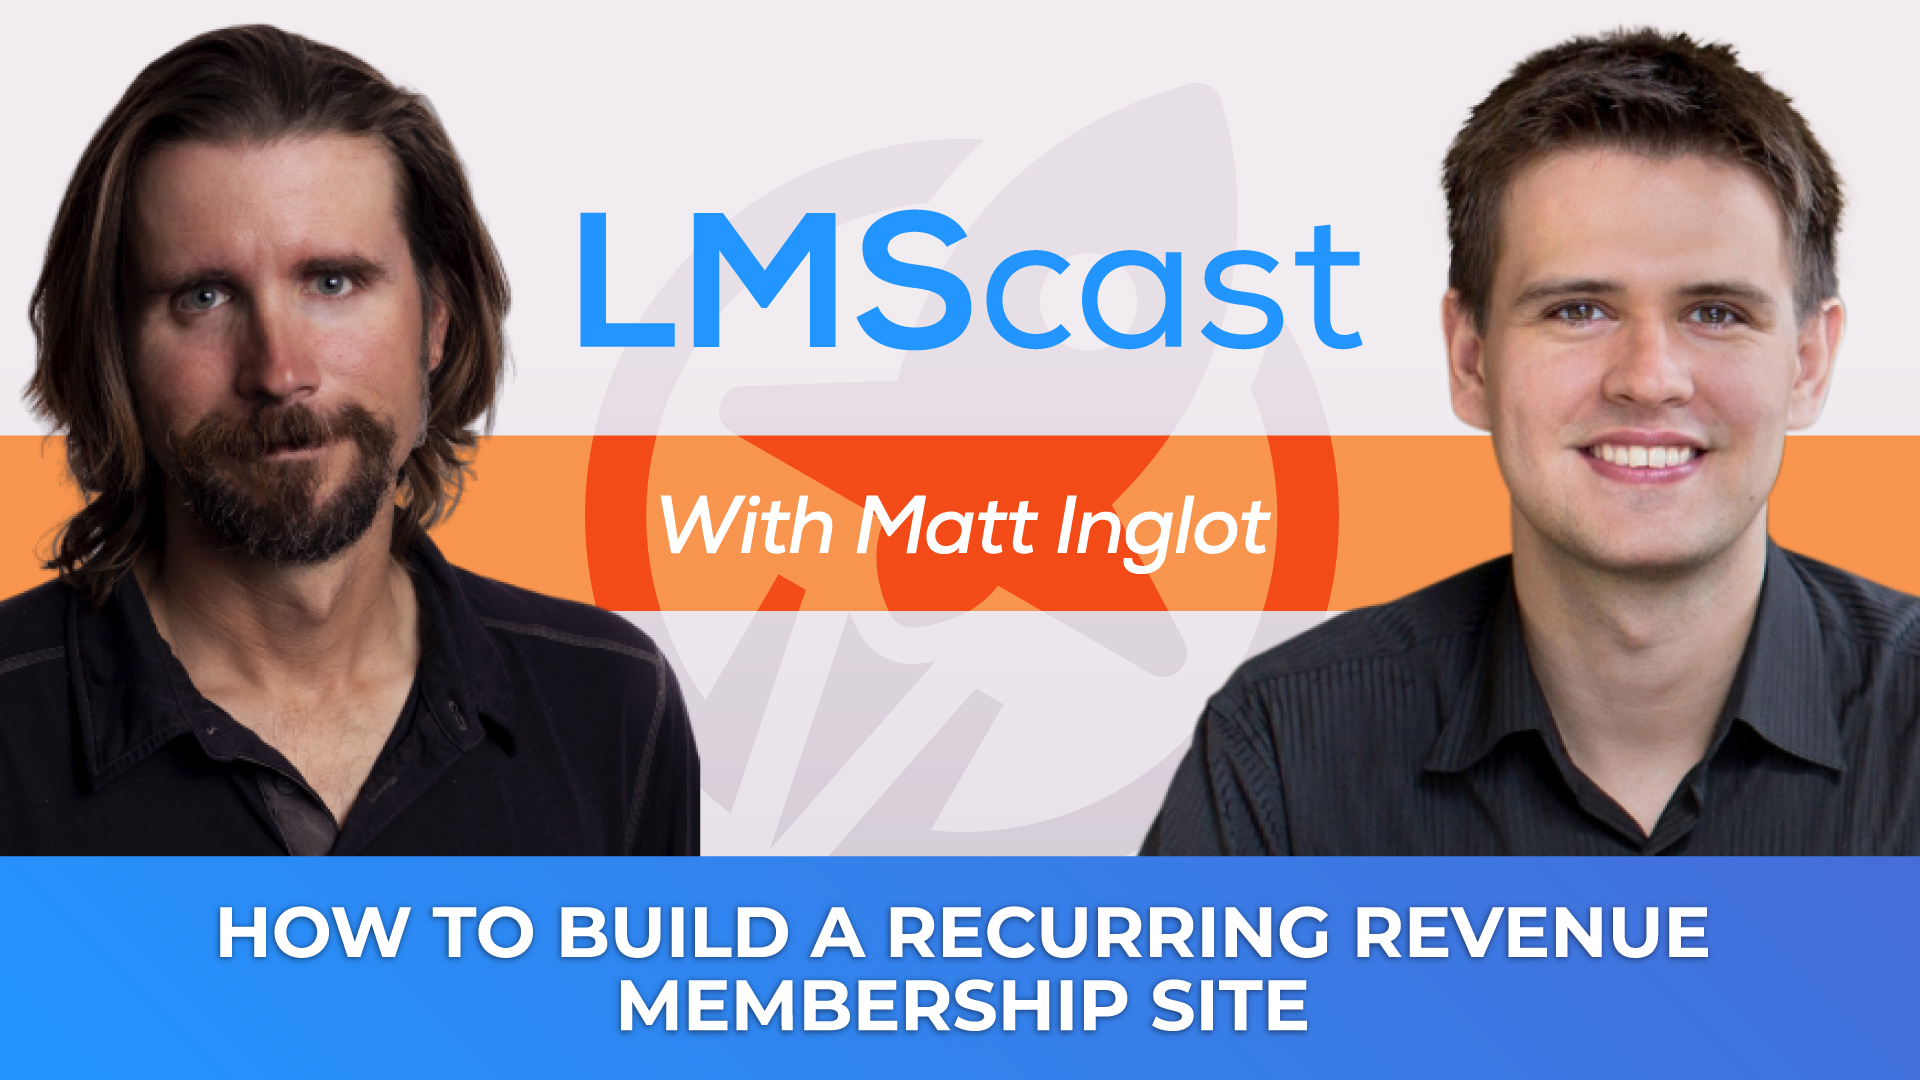 How to Build a Recurring Revenue Membership Site with Matt Inglot